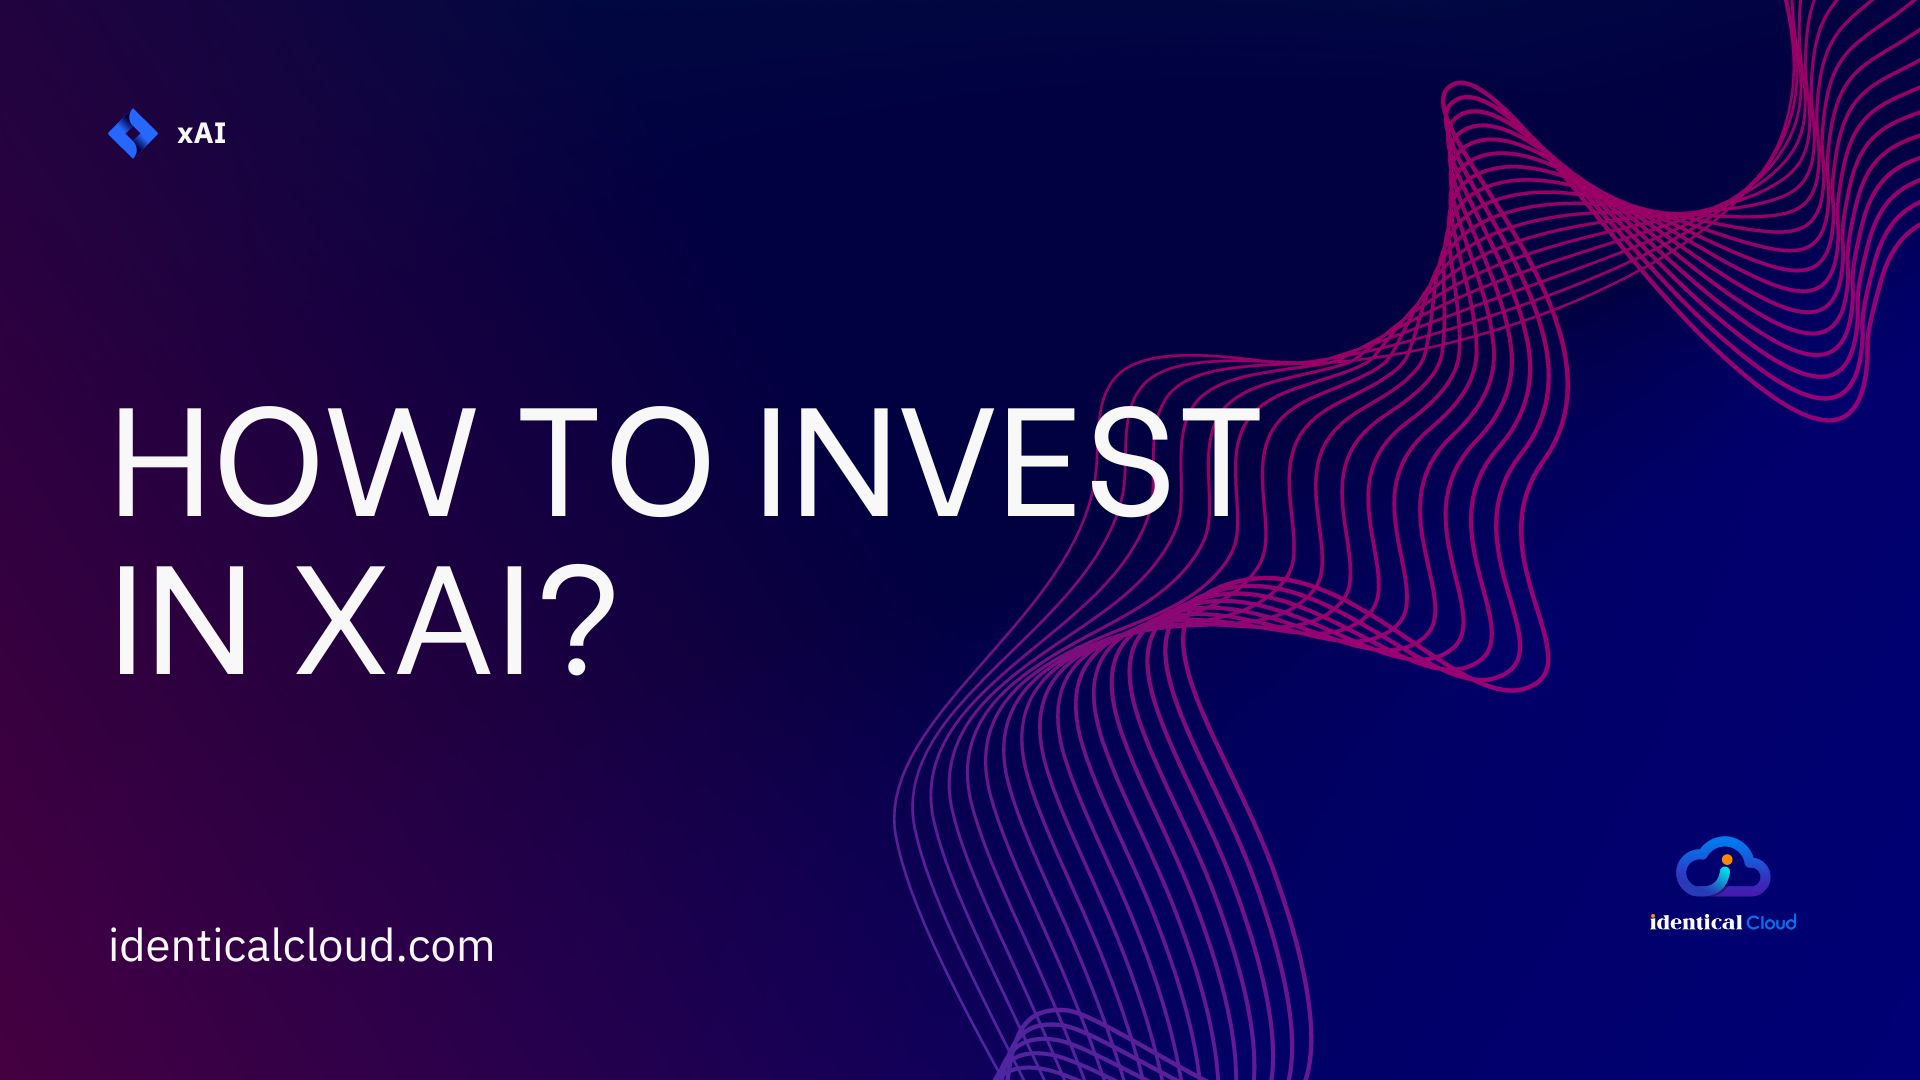 Are you interested in investing in the future of artificial intelligence? Learn how to invest in xAI, a rapidly growing field that has the potential to revolutionize many industries.